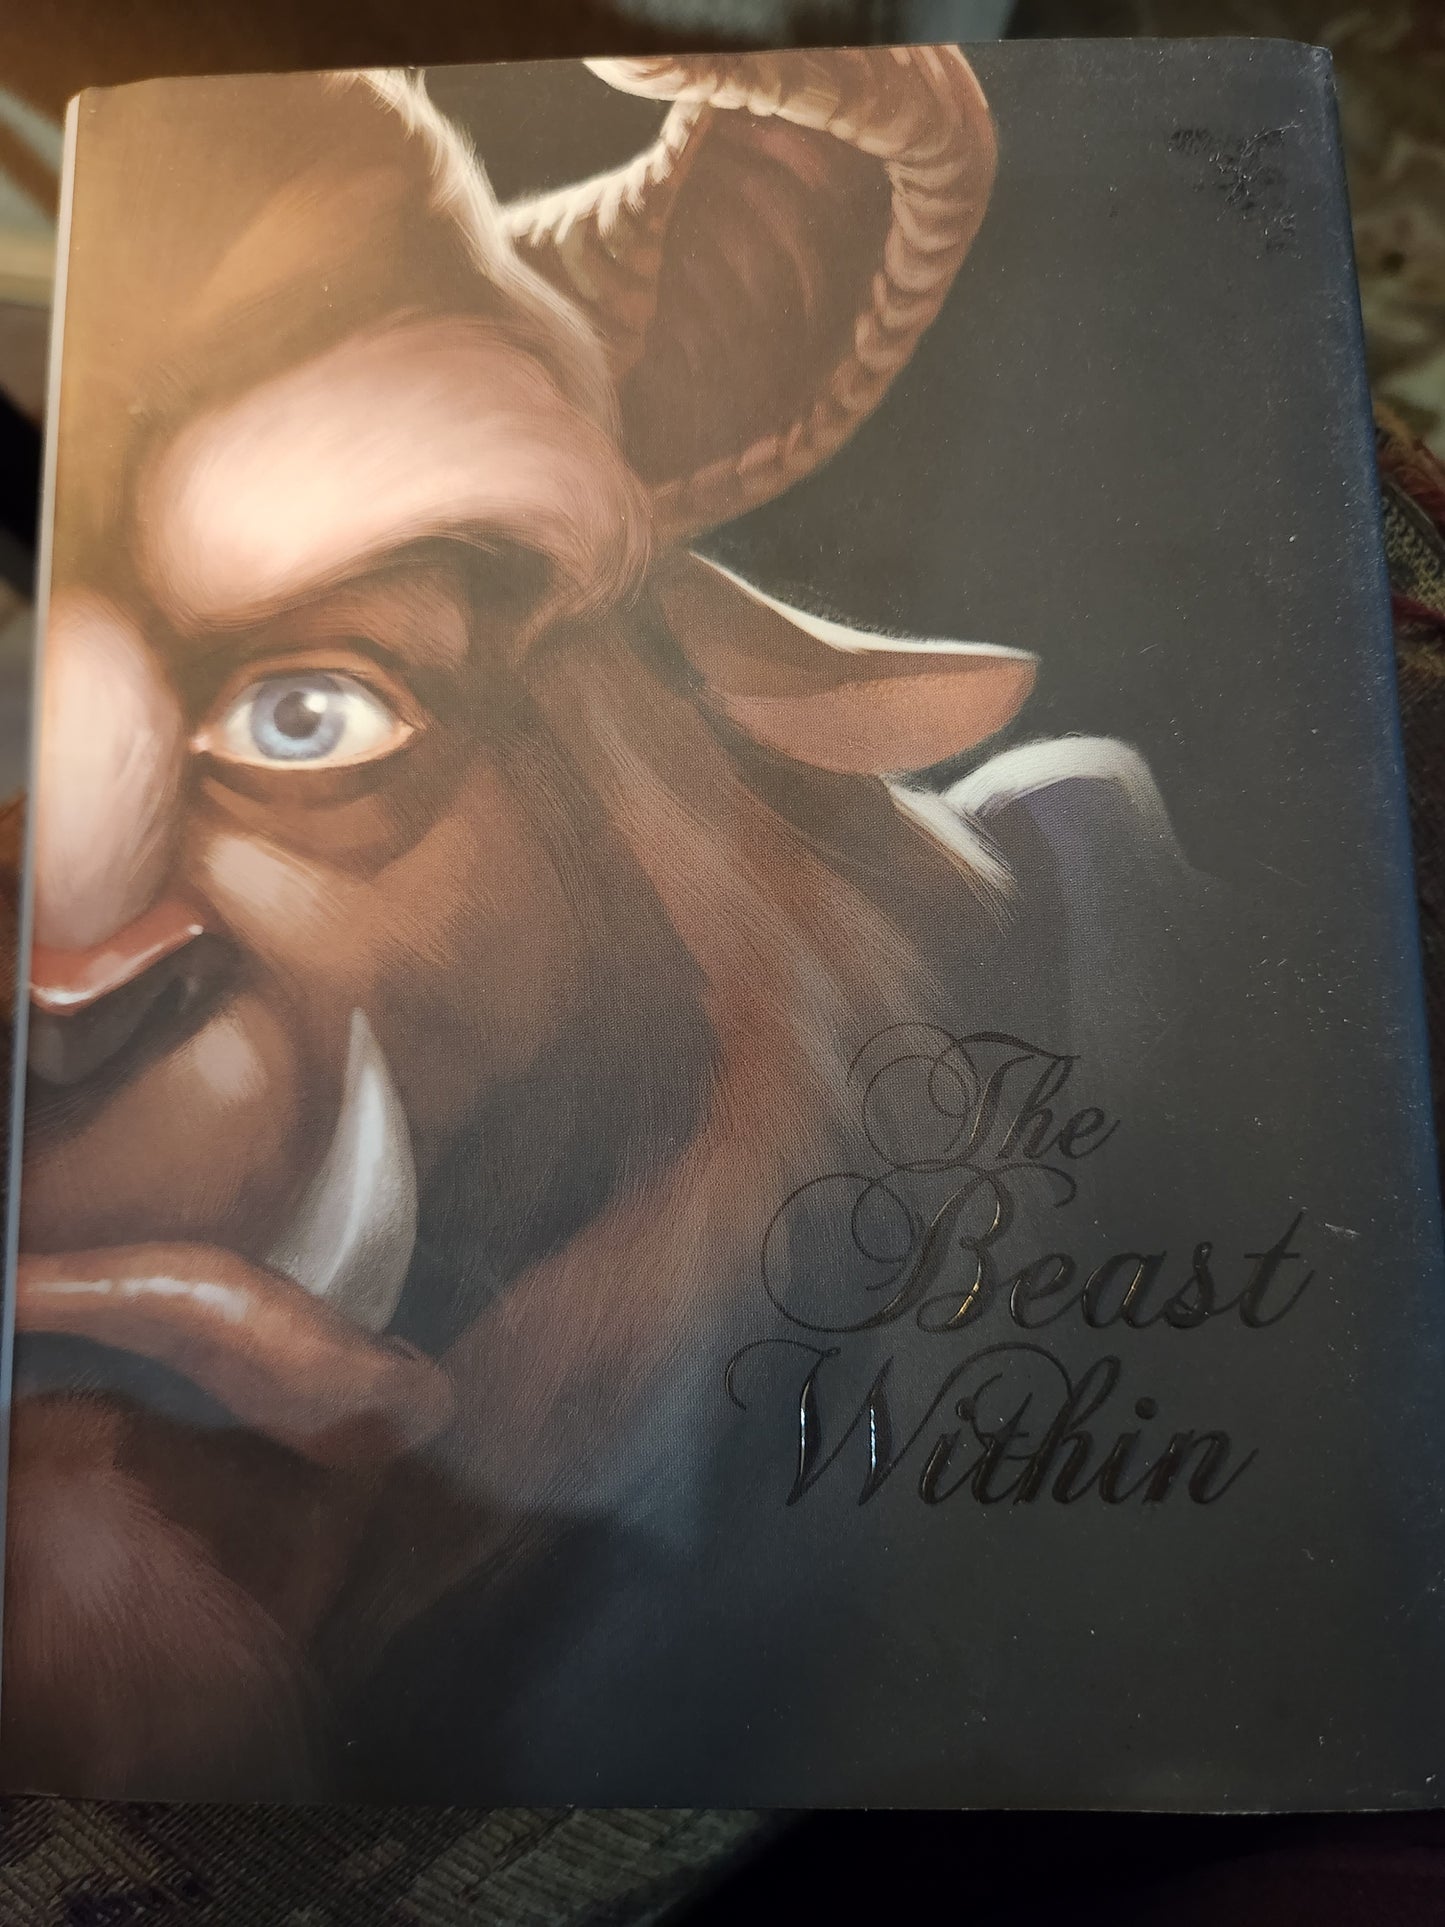 "The Beast Within" by Serena Valentino